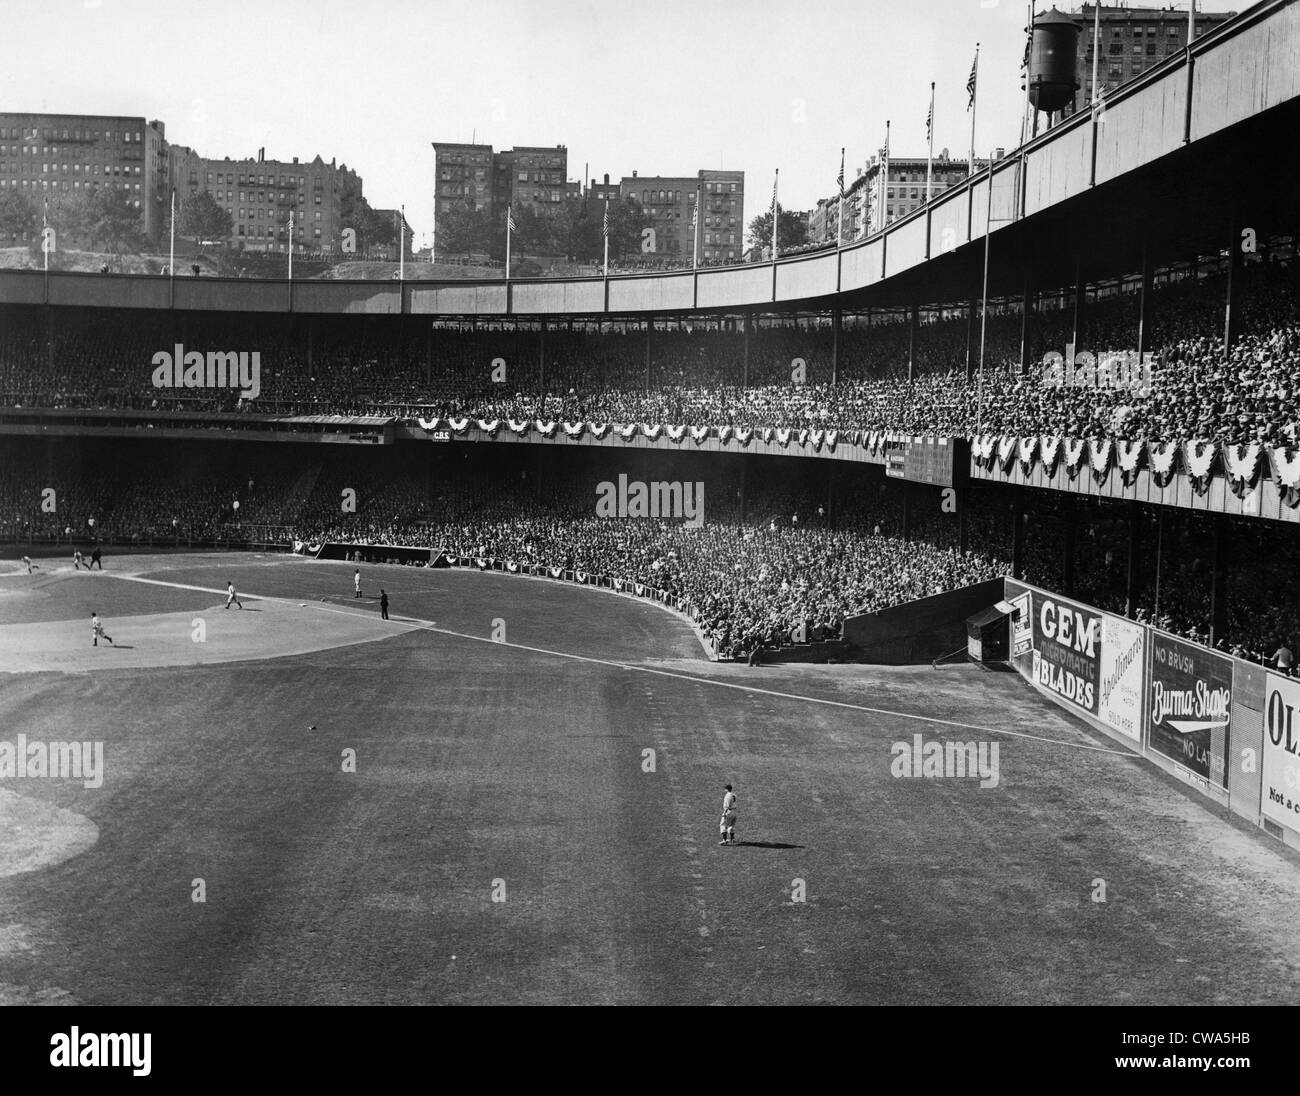 New york giants baseball hi-res stock photography and images - Alamy